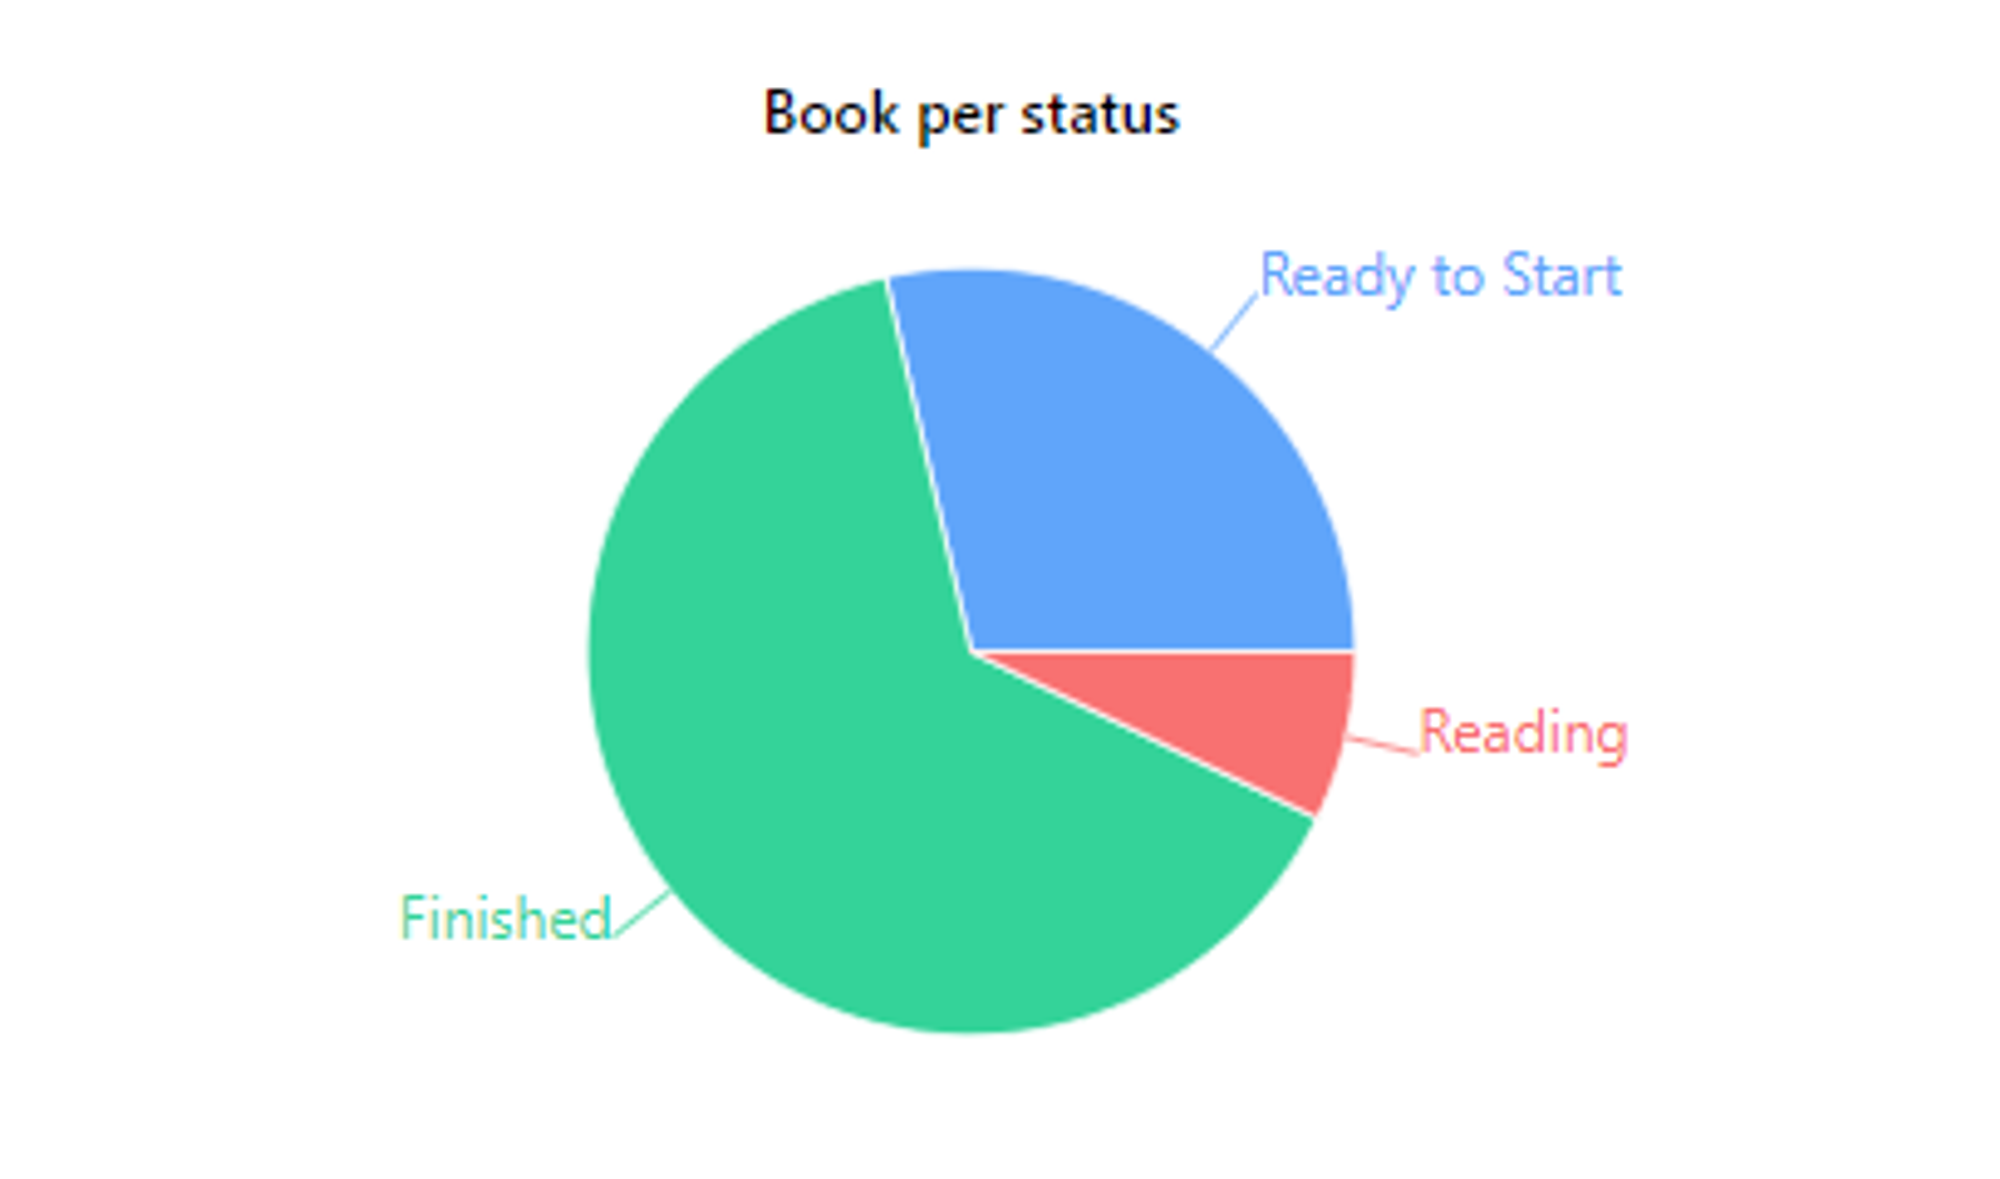 This Pie chart show that most of the books are already finished